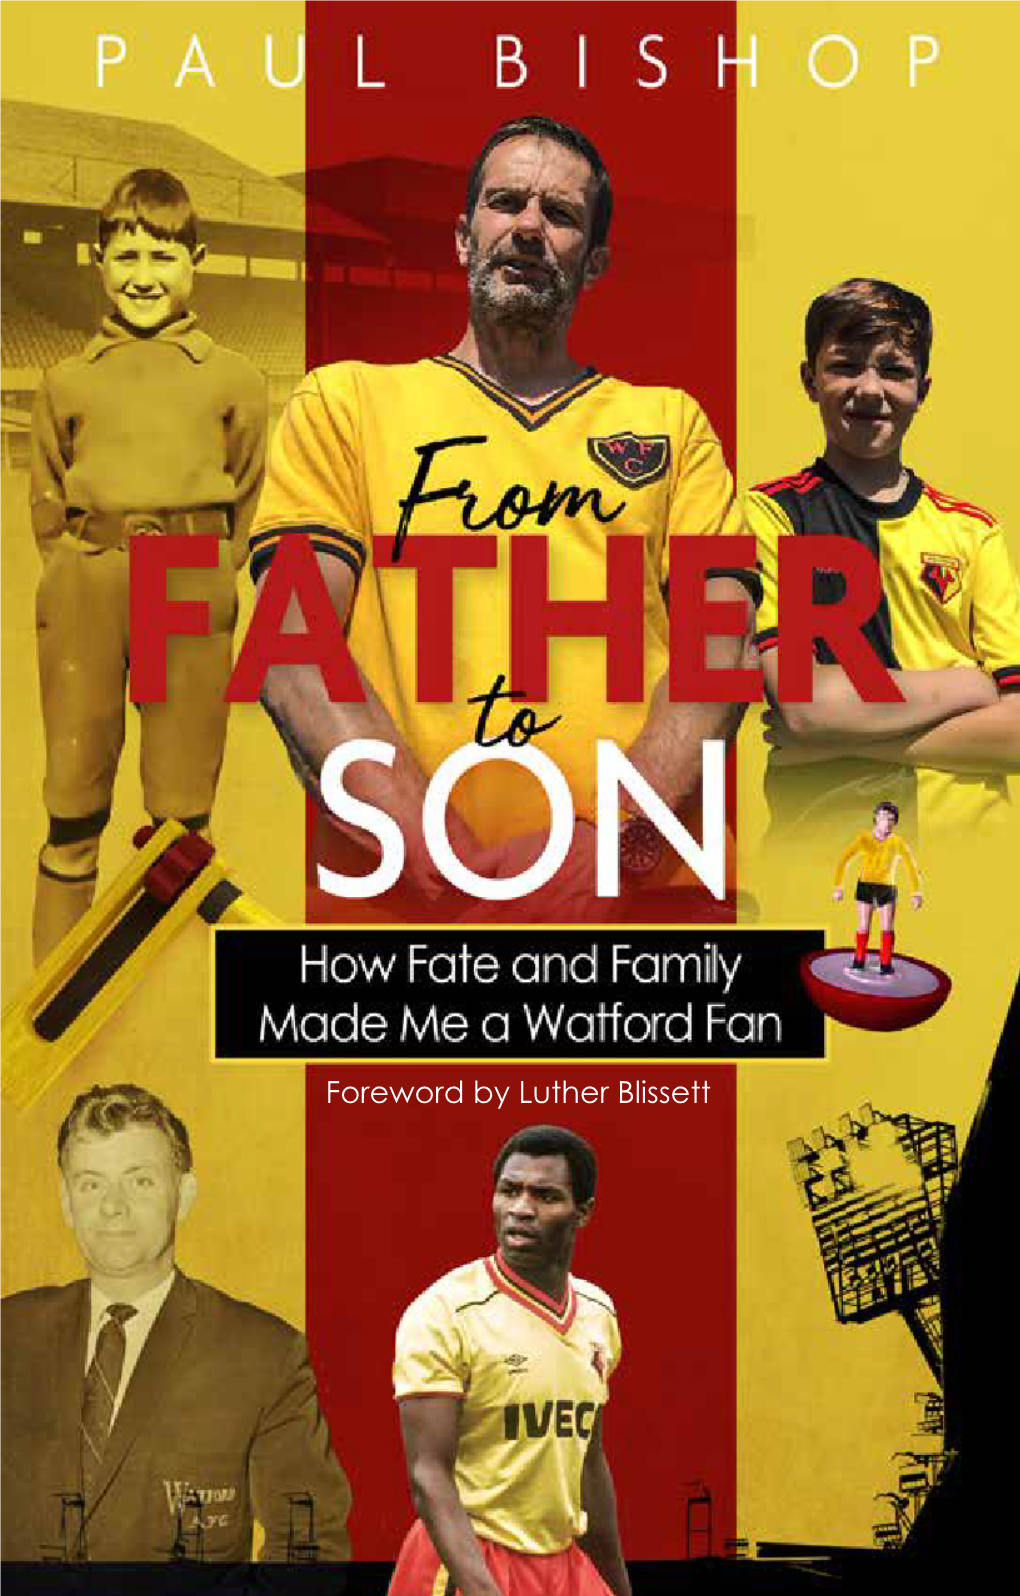 Foreword by Luther Blissett